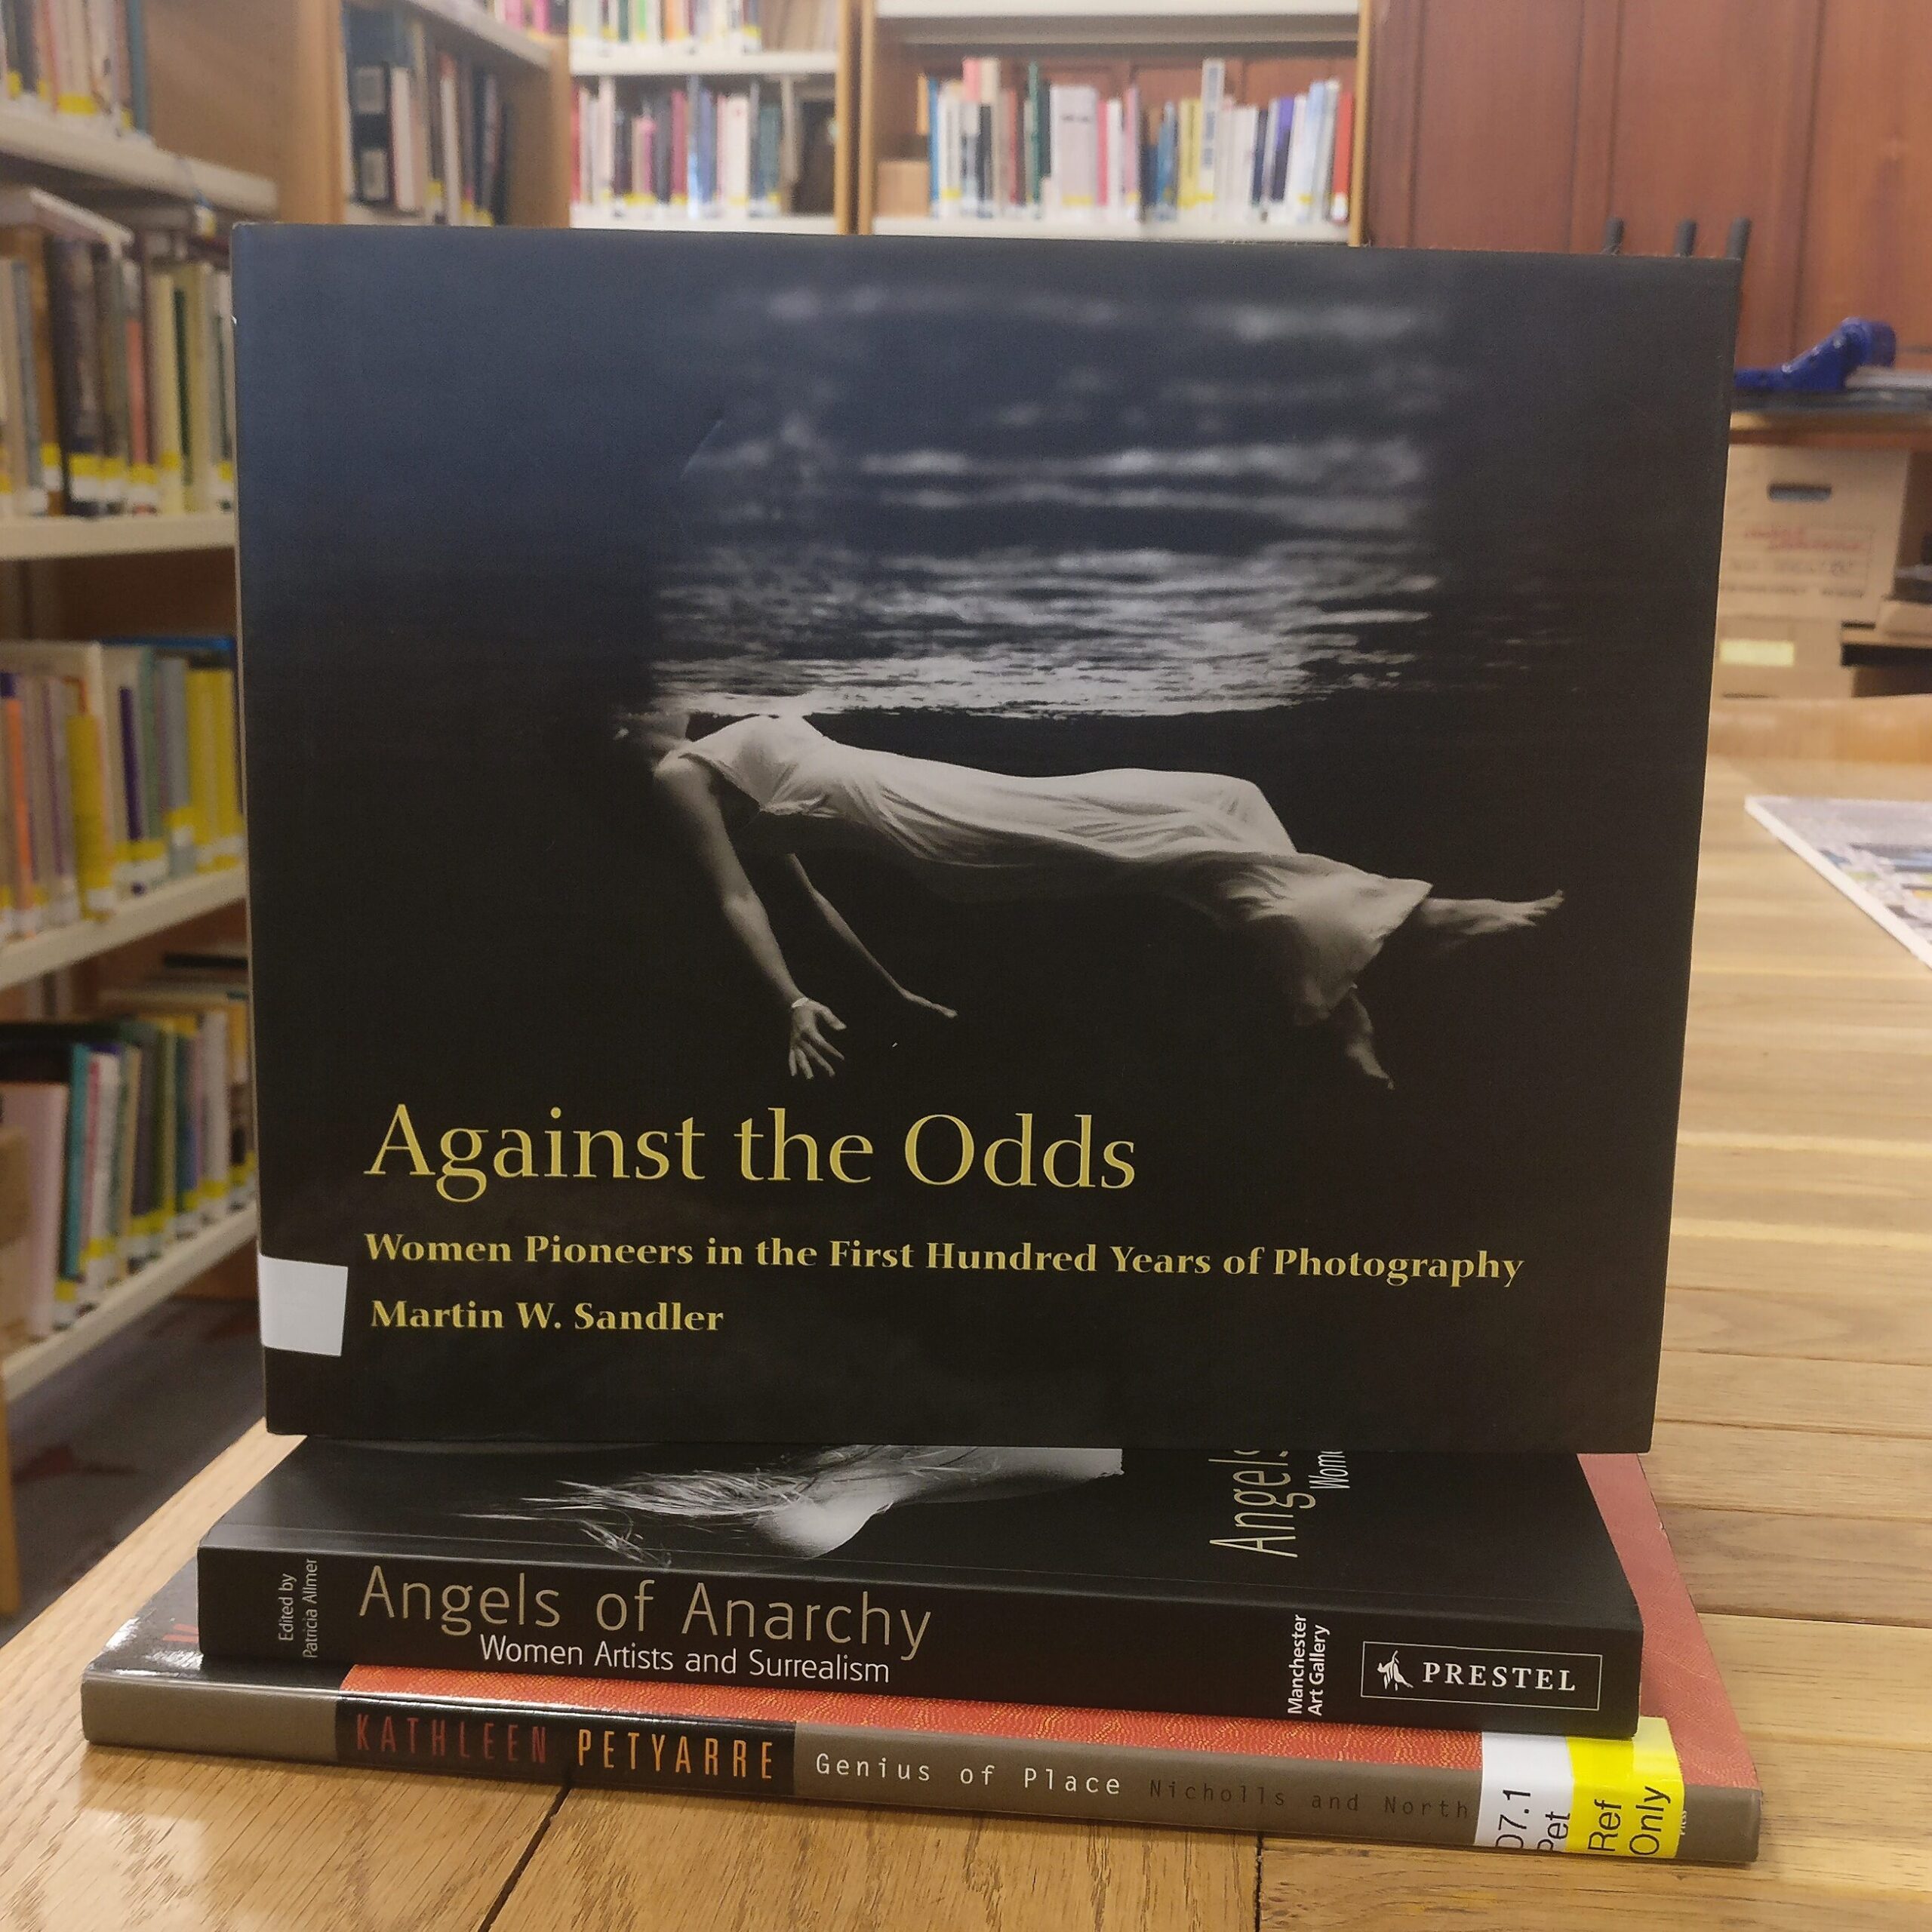 Depicting the front cover of 'Against the Odds', a black and white image of a woman in a white dress underwater, her face just breaking the surface, the title of the book below her figure. 